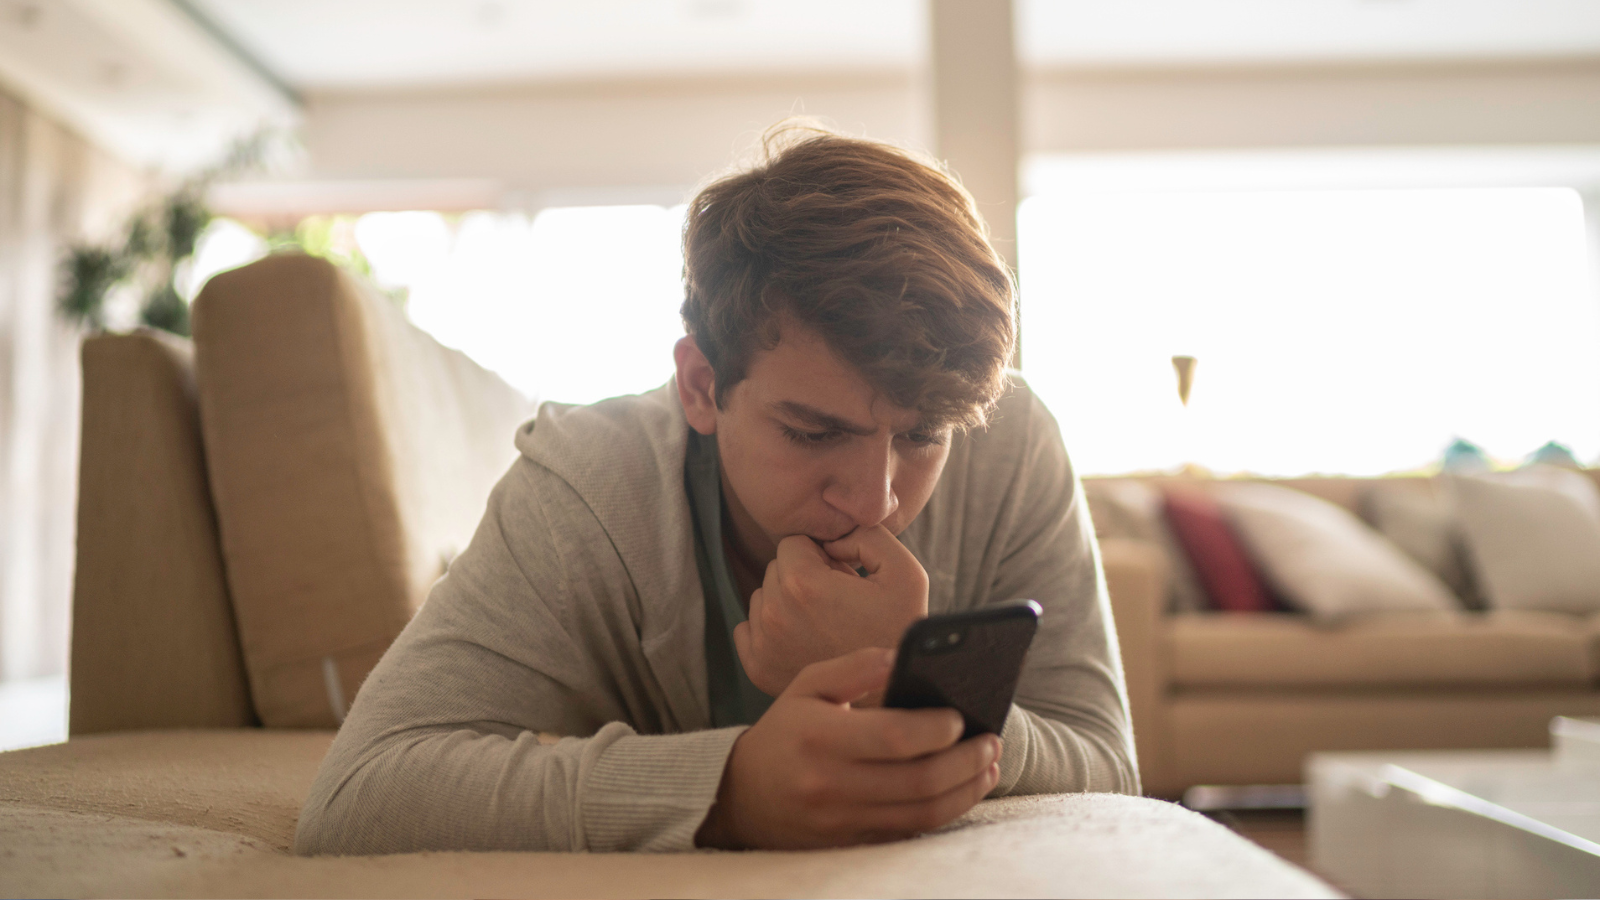 This Expert on Youth Anxiety Says These 4 Guidelines on Phones Are Critical